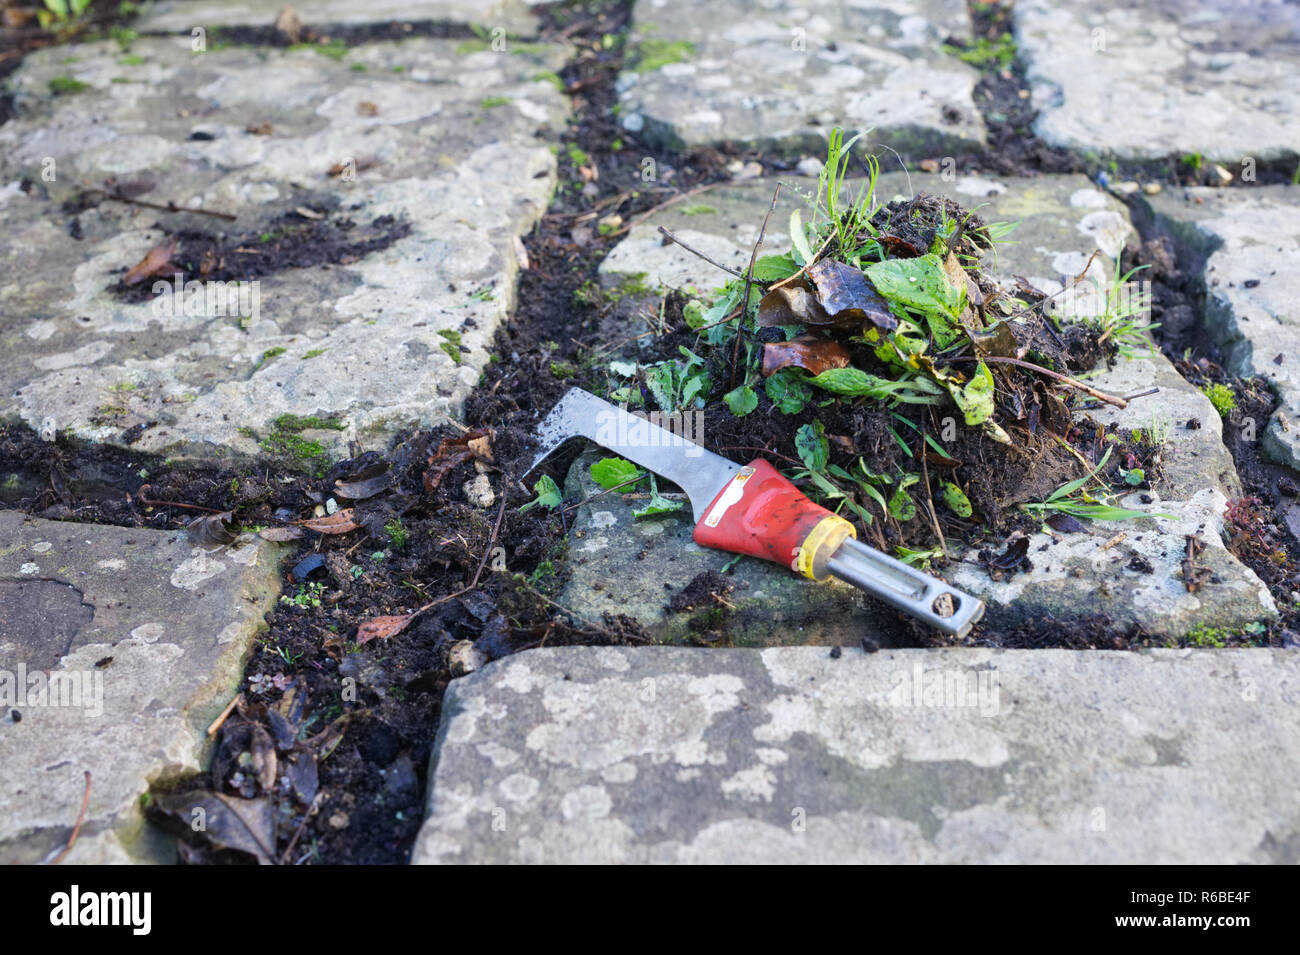 Weeding between the crevices in a flagstone patio. Stock Photo